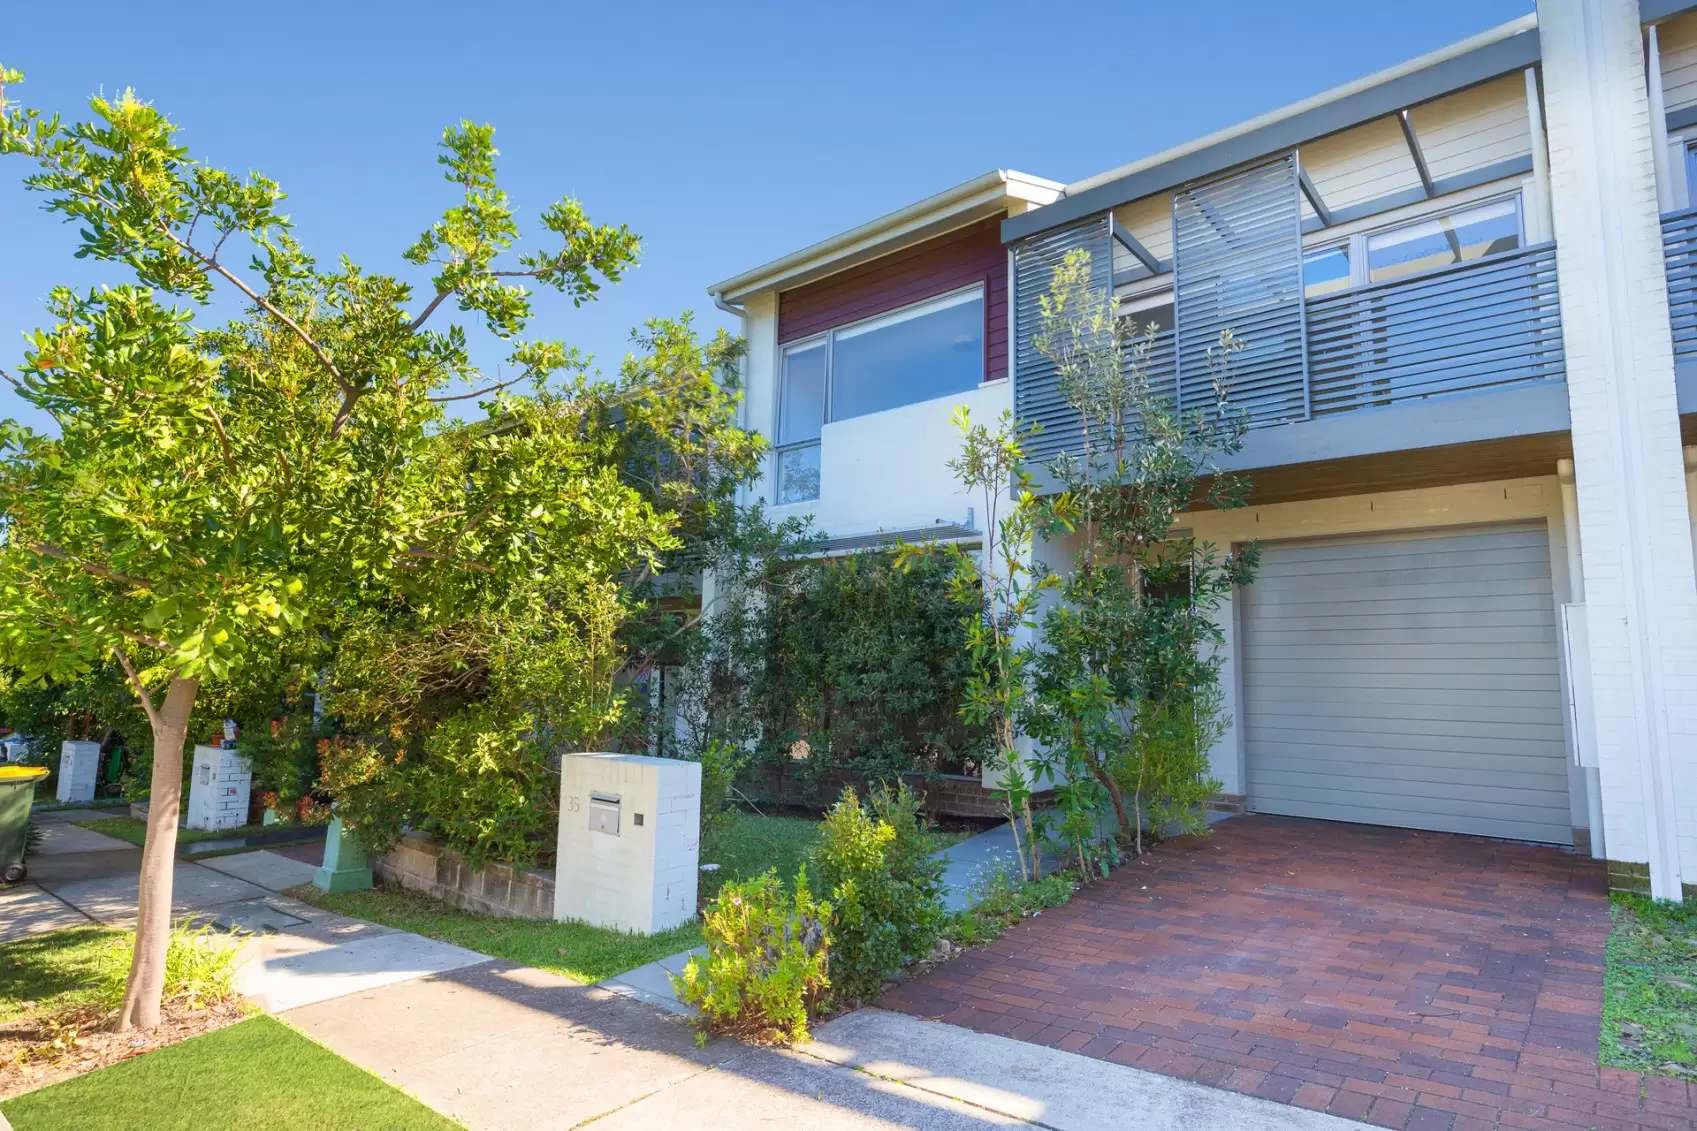 35 Asturias Avenue, South Coogee Leased by Ballard Property - image 1